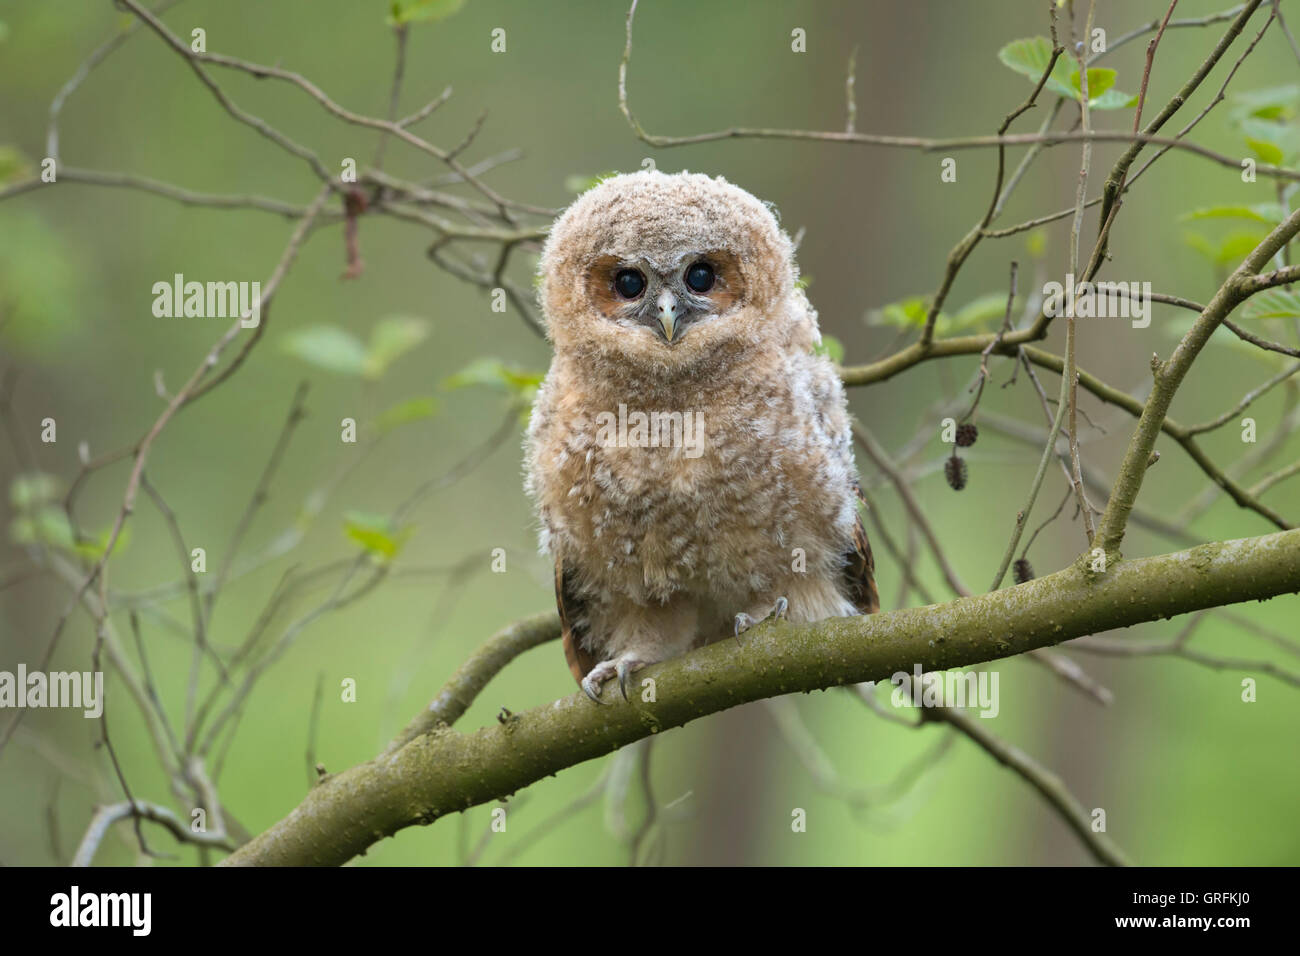 Cute fledgling of Tawny Owl / Waldkauz ( Strix aluco ) perched on a branch, begging for food, its dark brown eyes wide open. Stock Photo